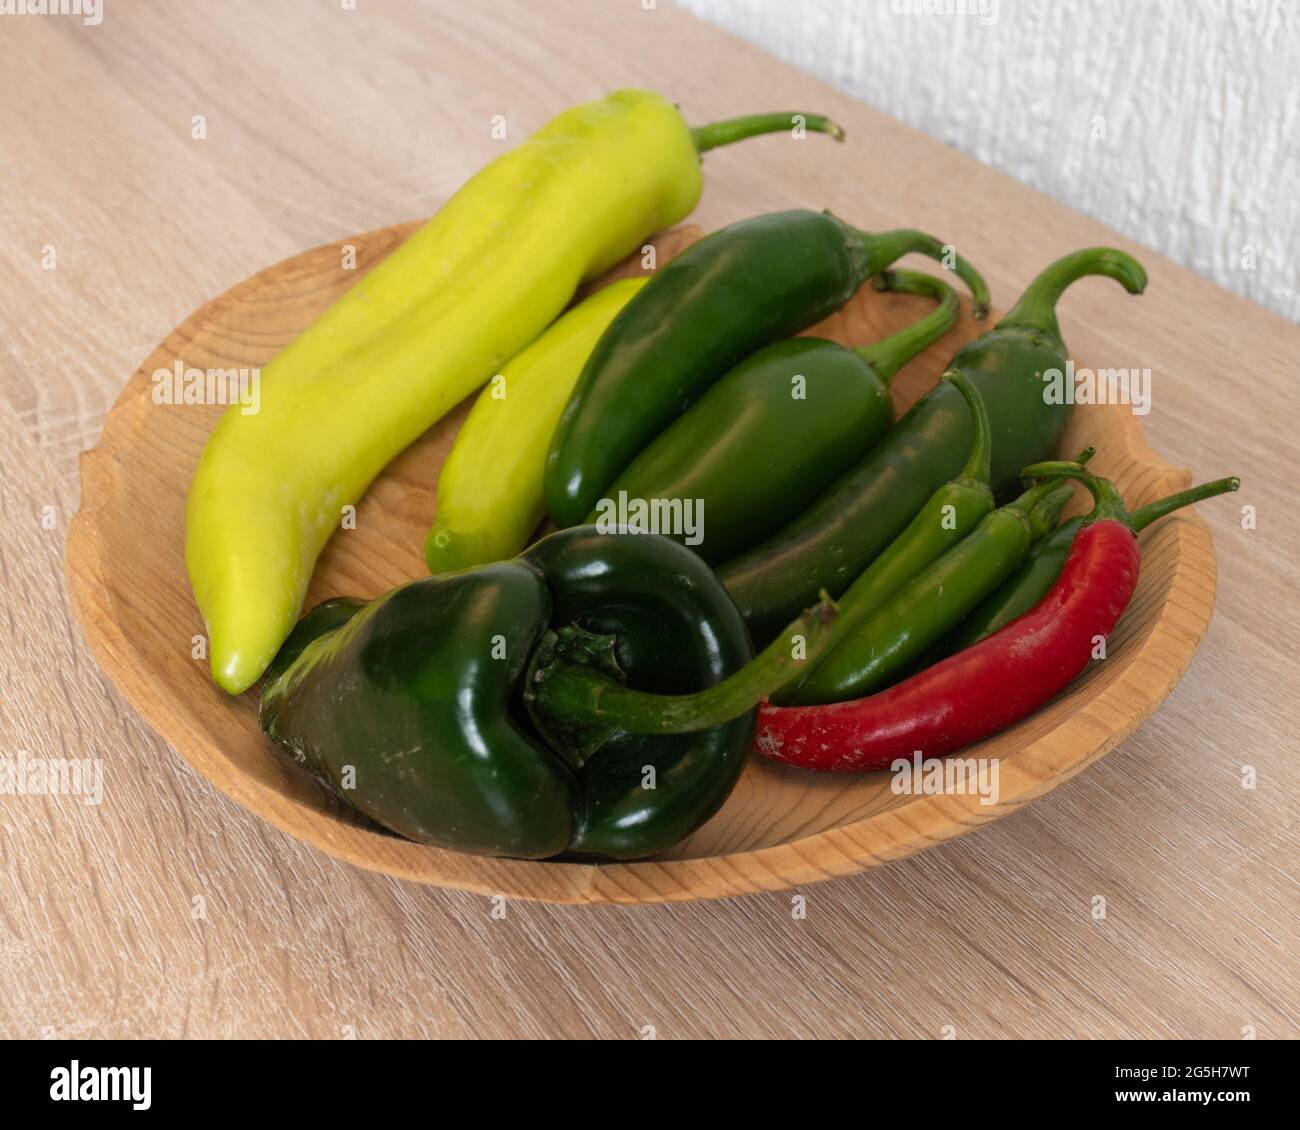 Wooden plate with mix of different peppers. Jalapeño, serrano, poblano, xcatik. Chiles frescos Stock Photo